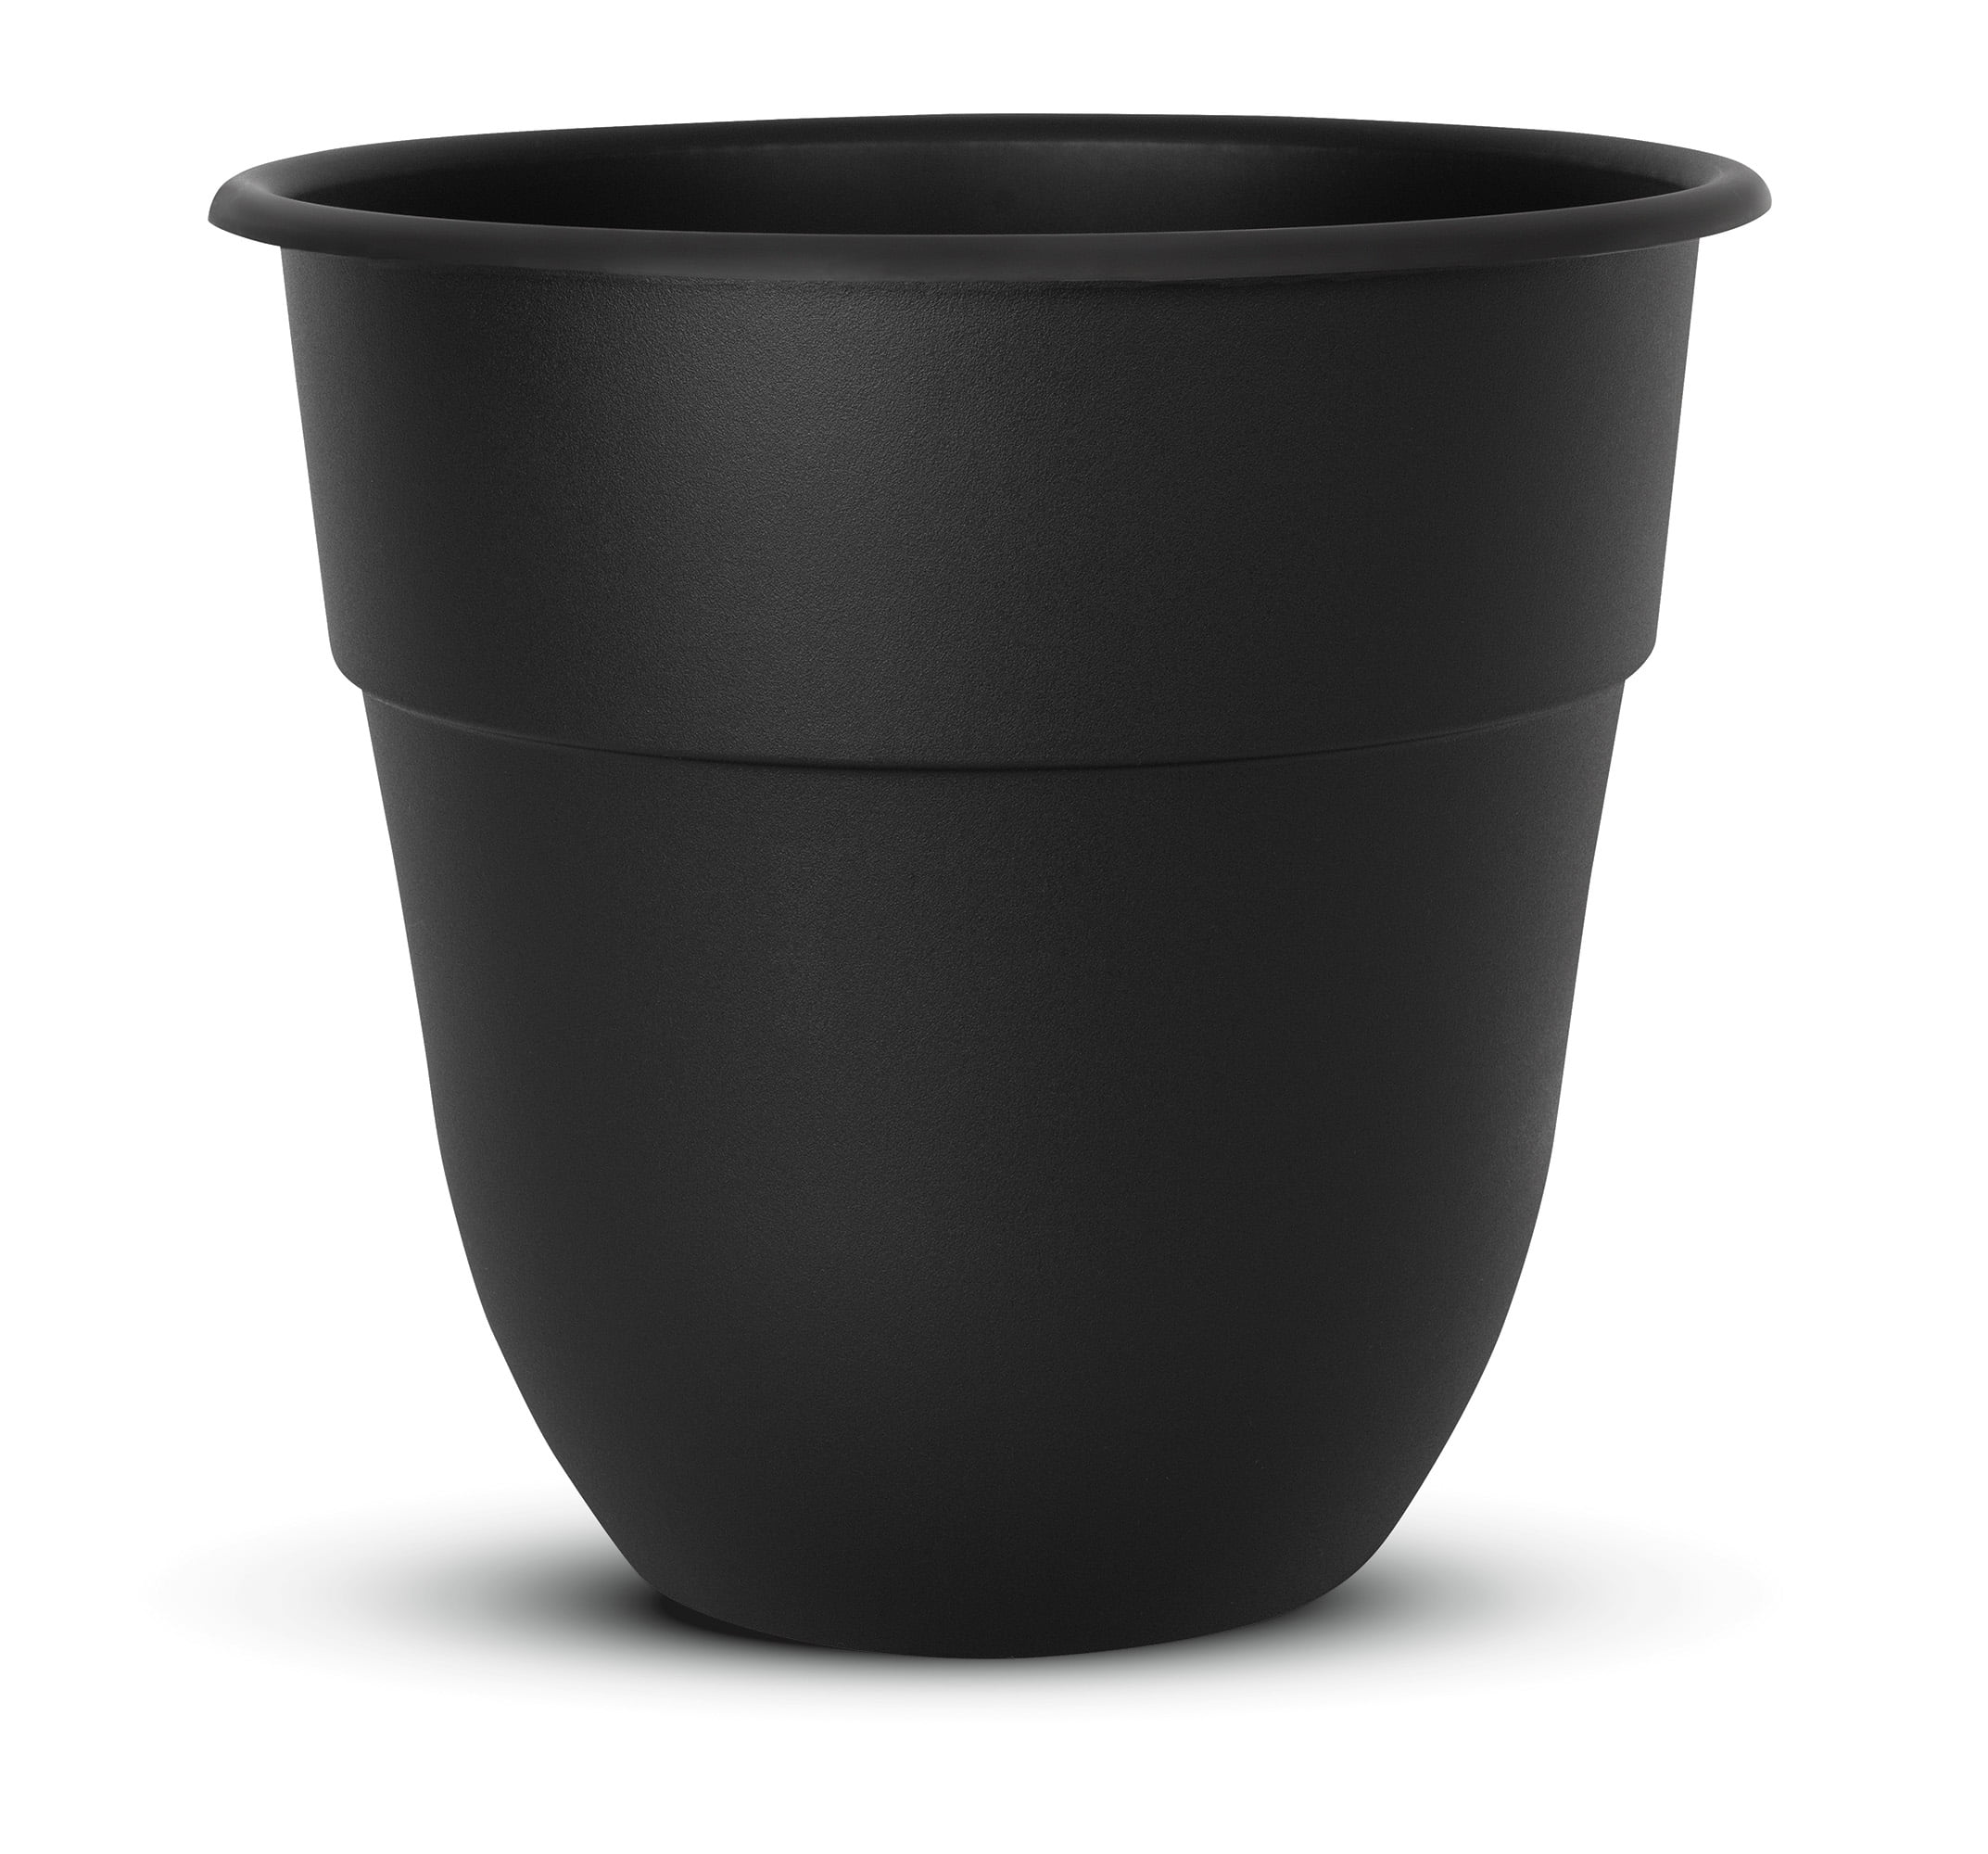 Black Resin Planter or Flower Pot Deck Box 26.85 x 12 in. Outdoor